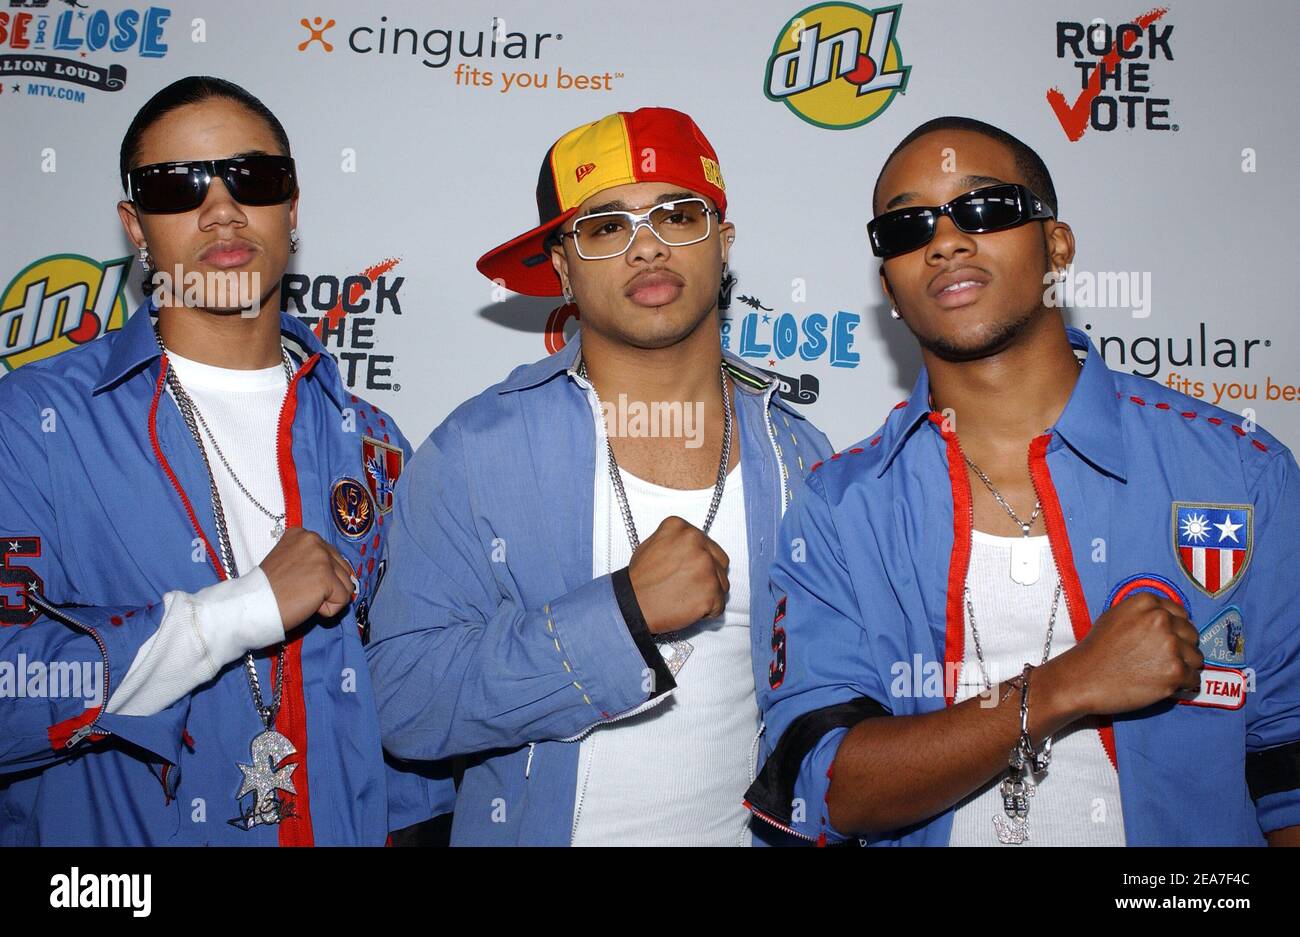 B2K arrive at the 11th annual Rock The Vote Awards ceremony, held at the Hollywood Palladium in Los Angeles, on Saturday, February 7, 2004. (Pictured : B2K). Photo by Nicolas Khayat/ABACA. Stock Photo